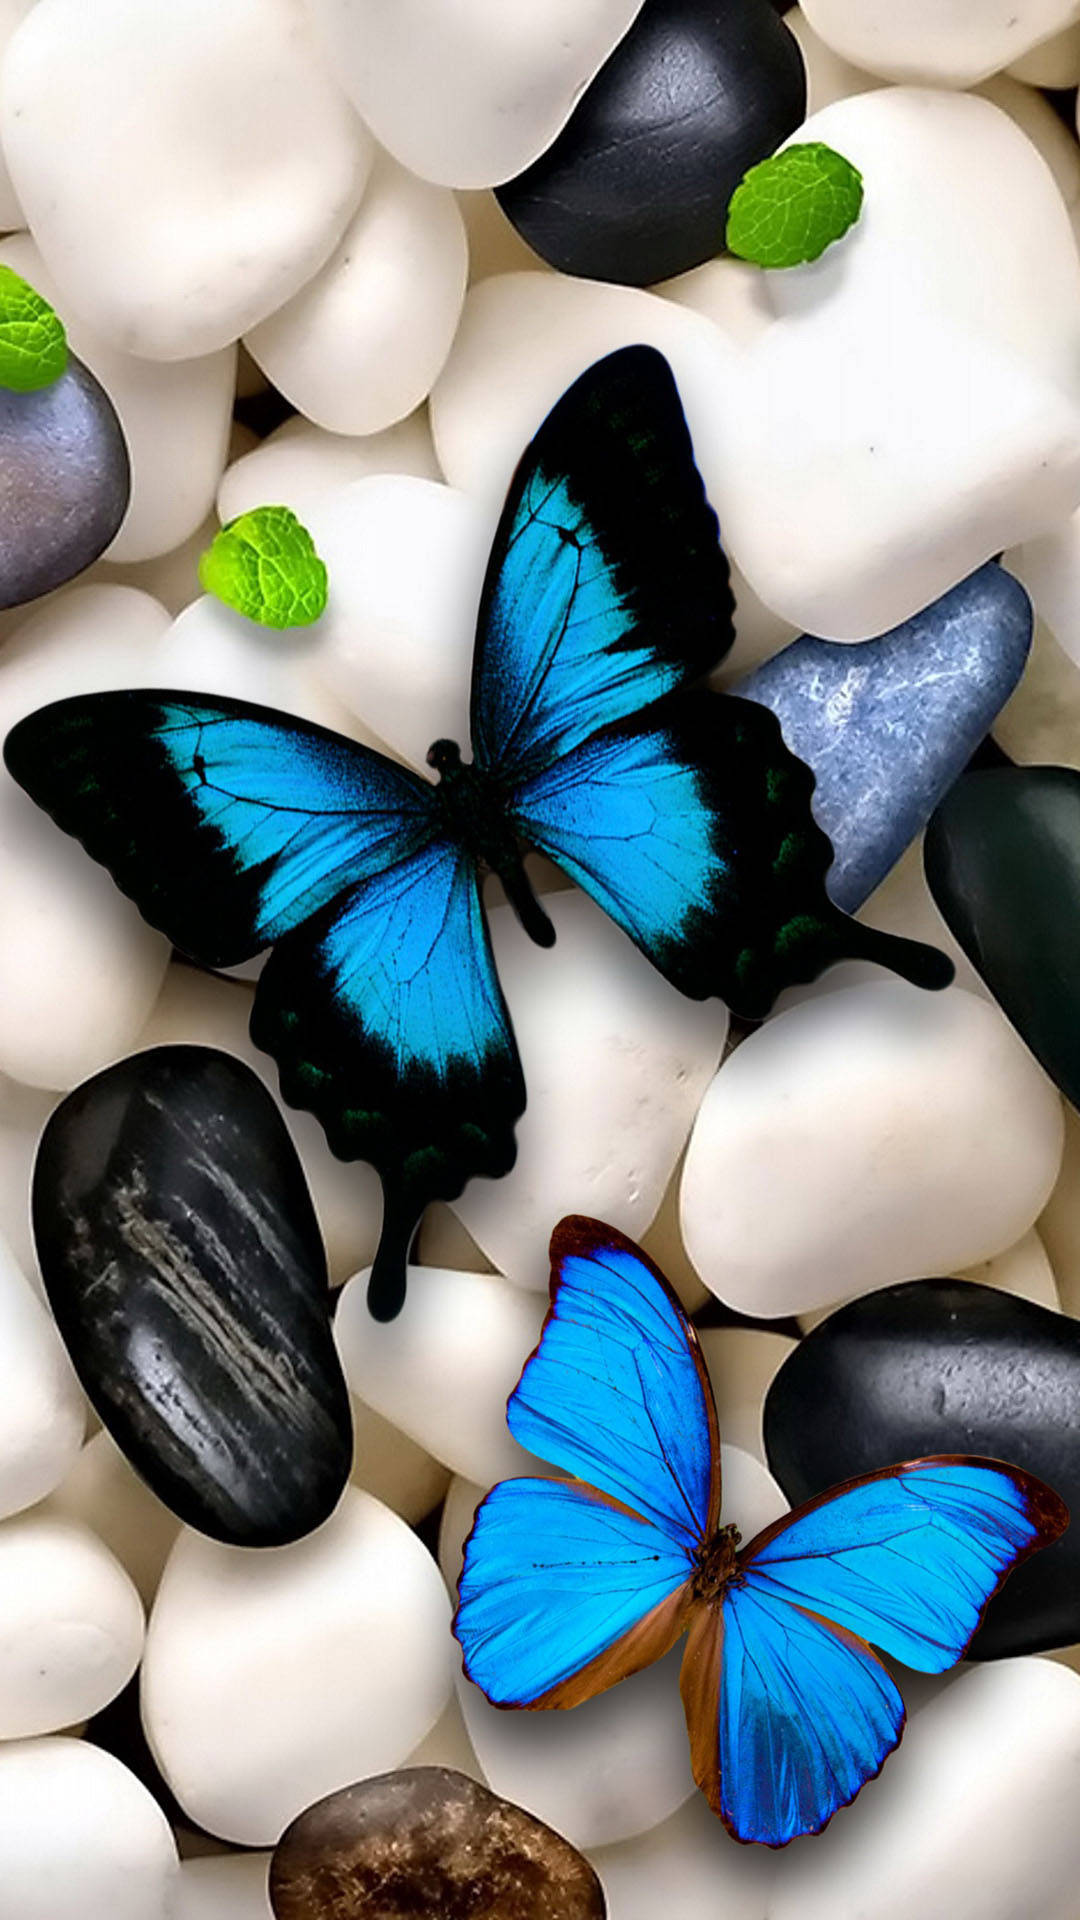 Butterfly Aesthetic On White Stones Background